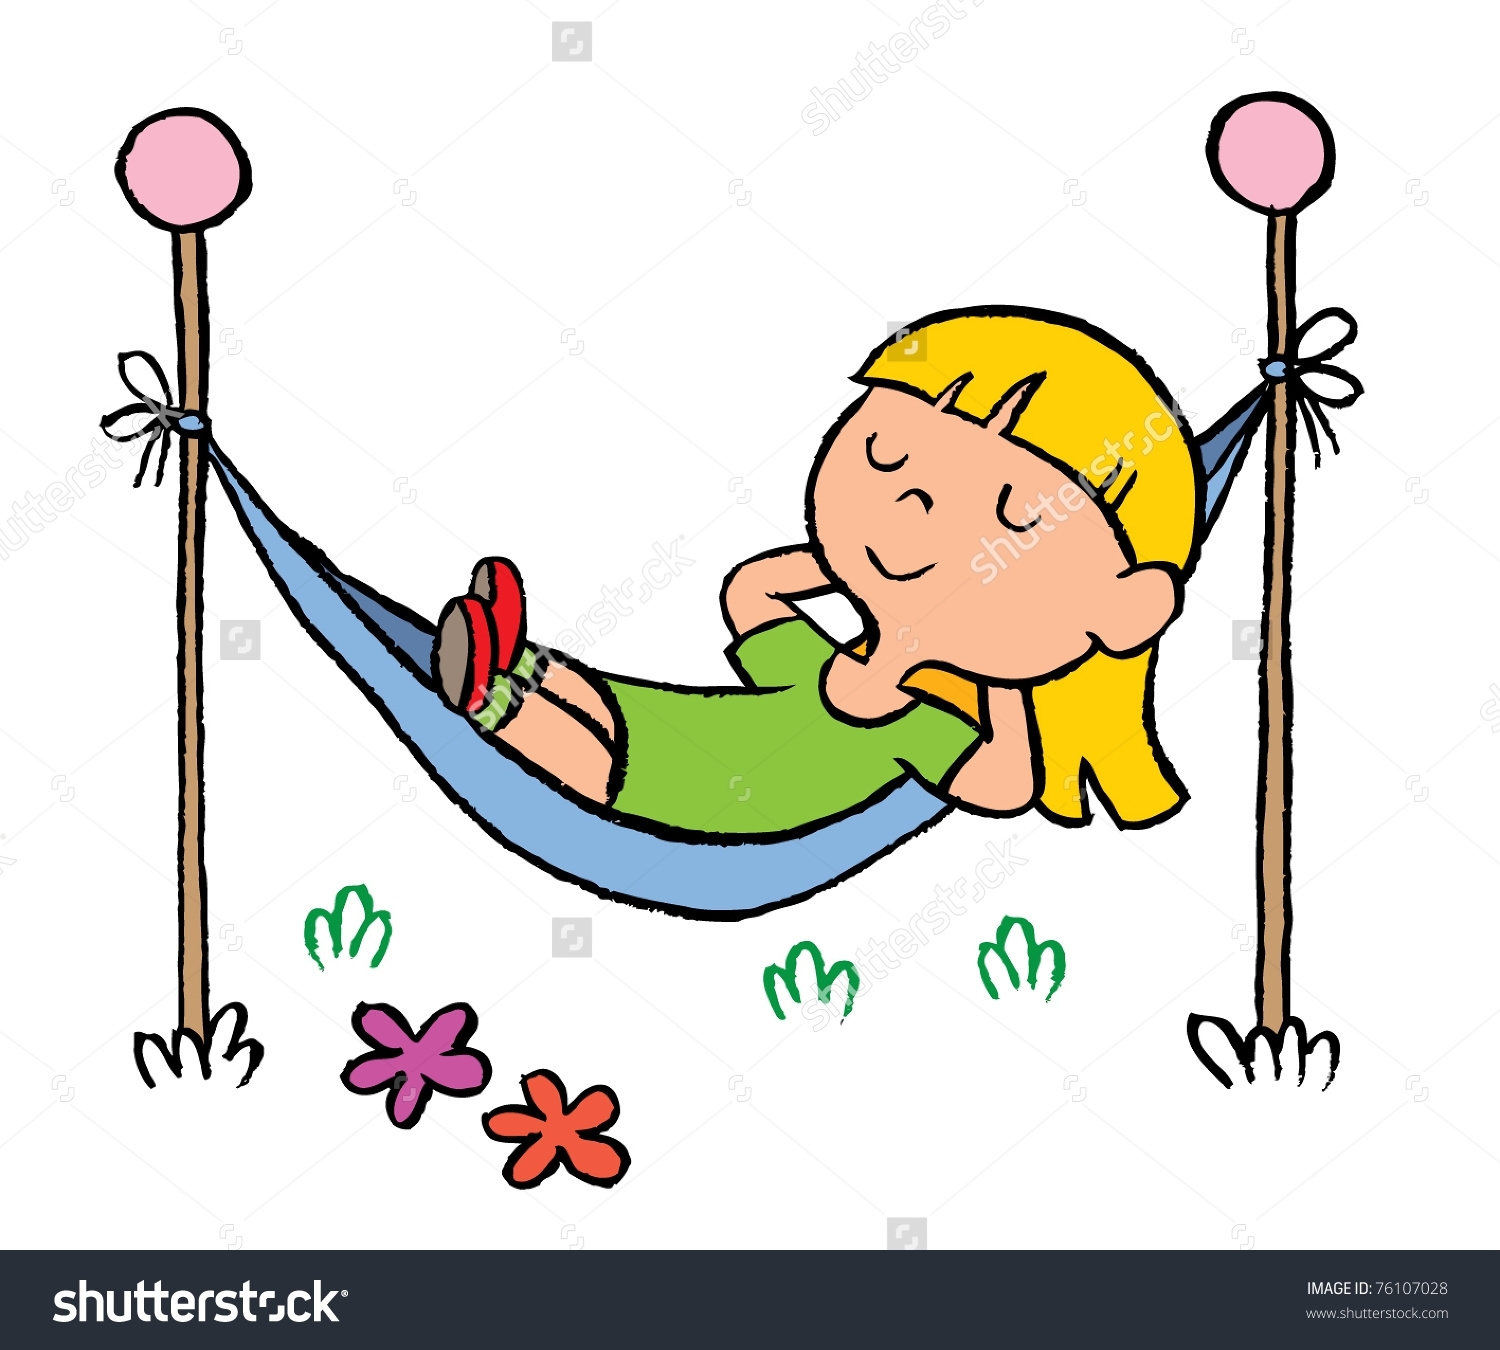 relax clipart